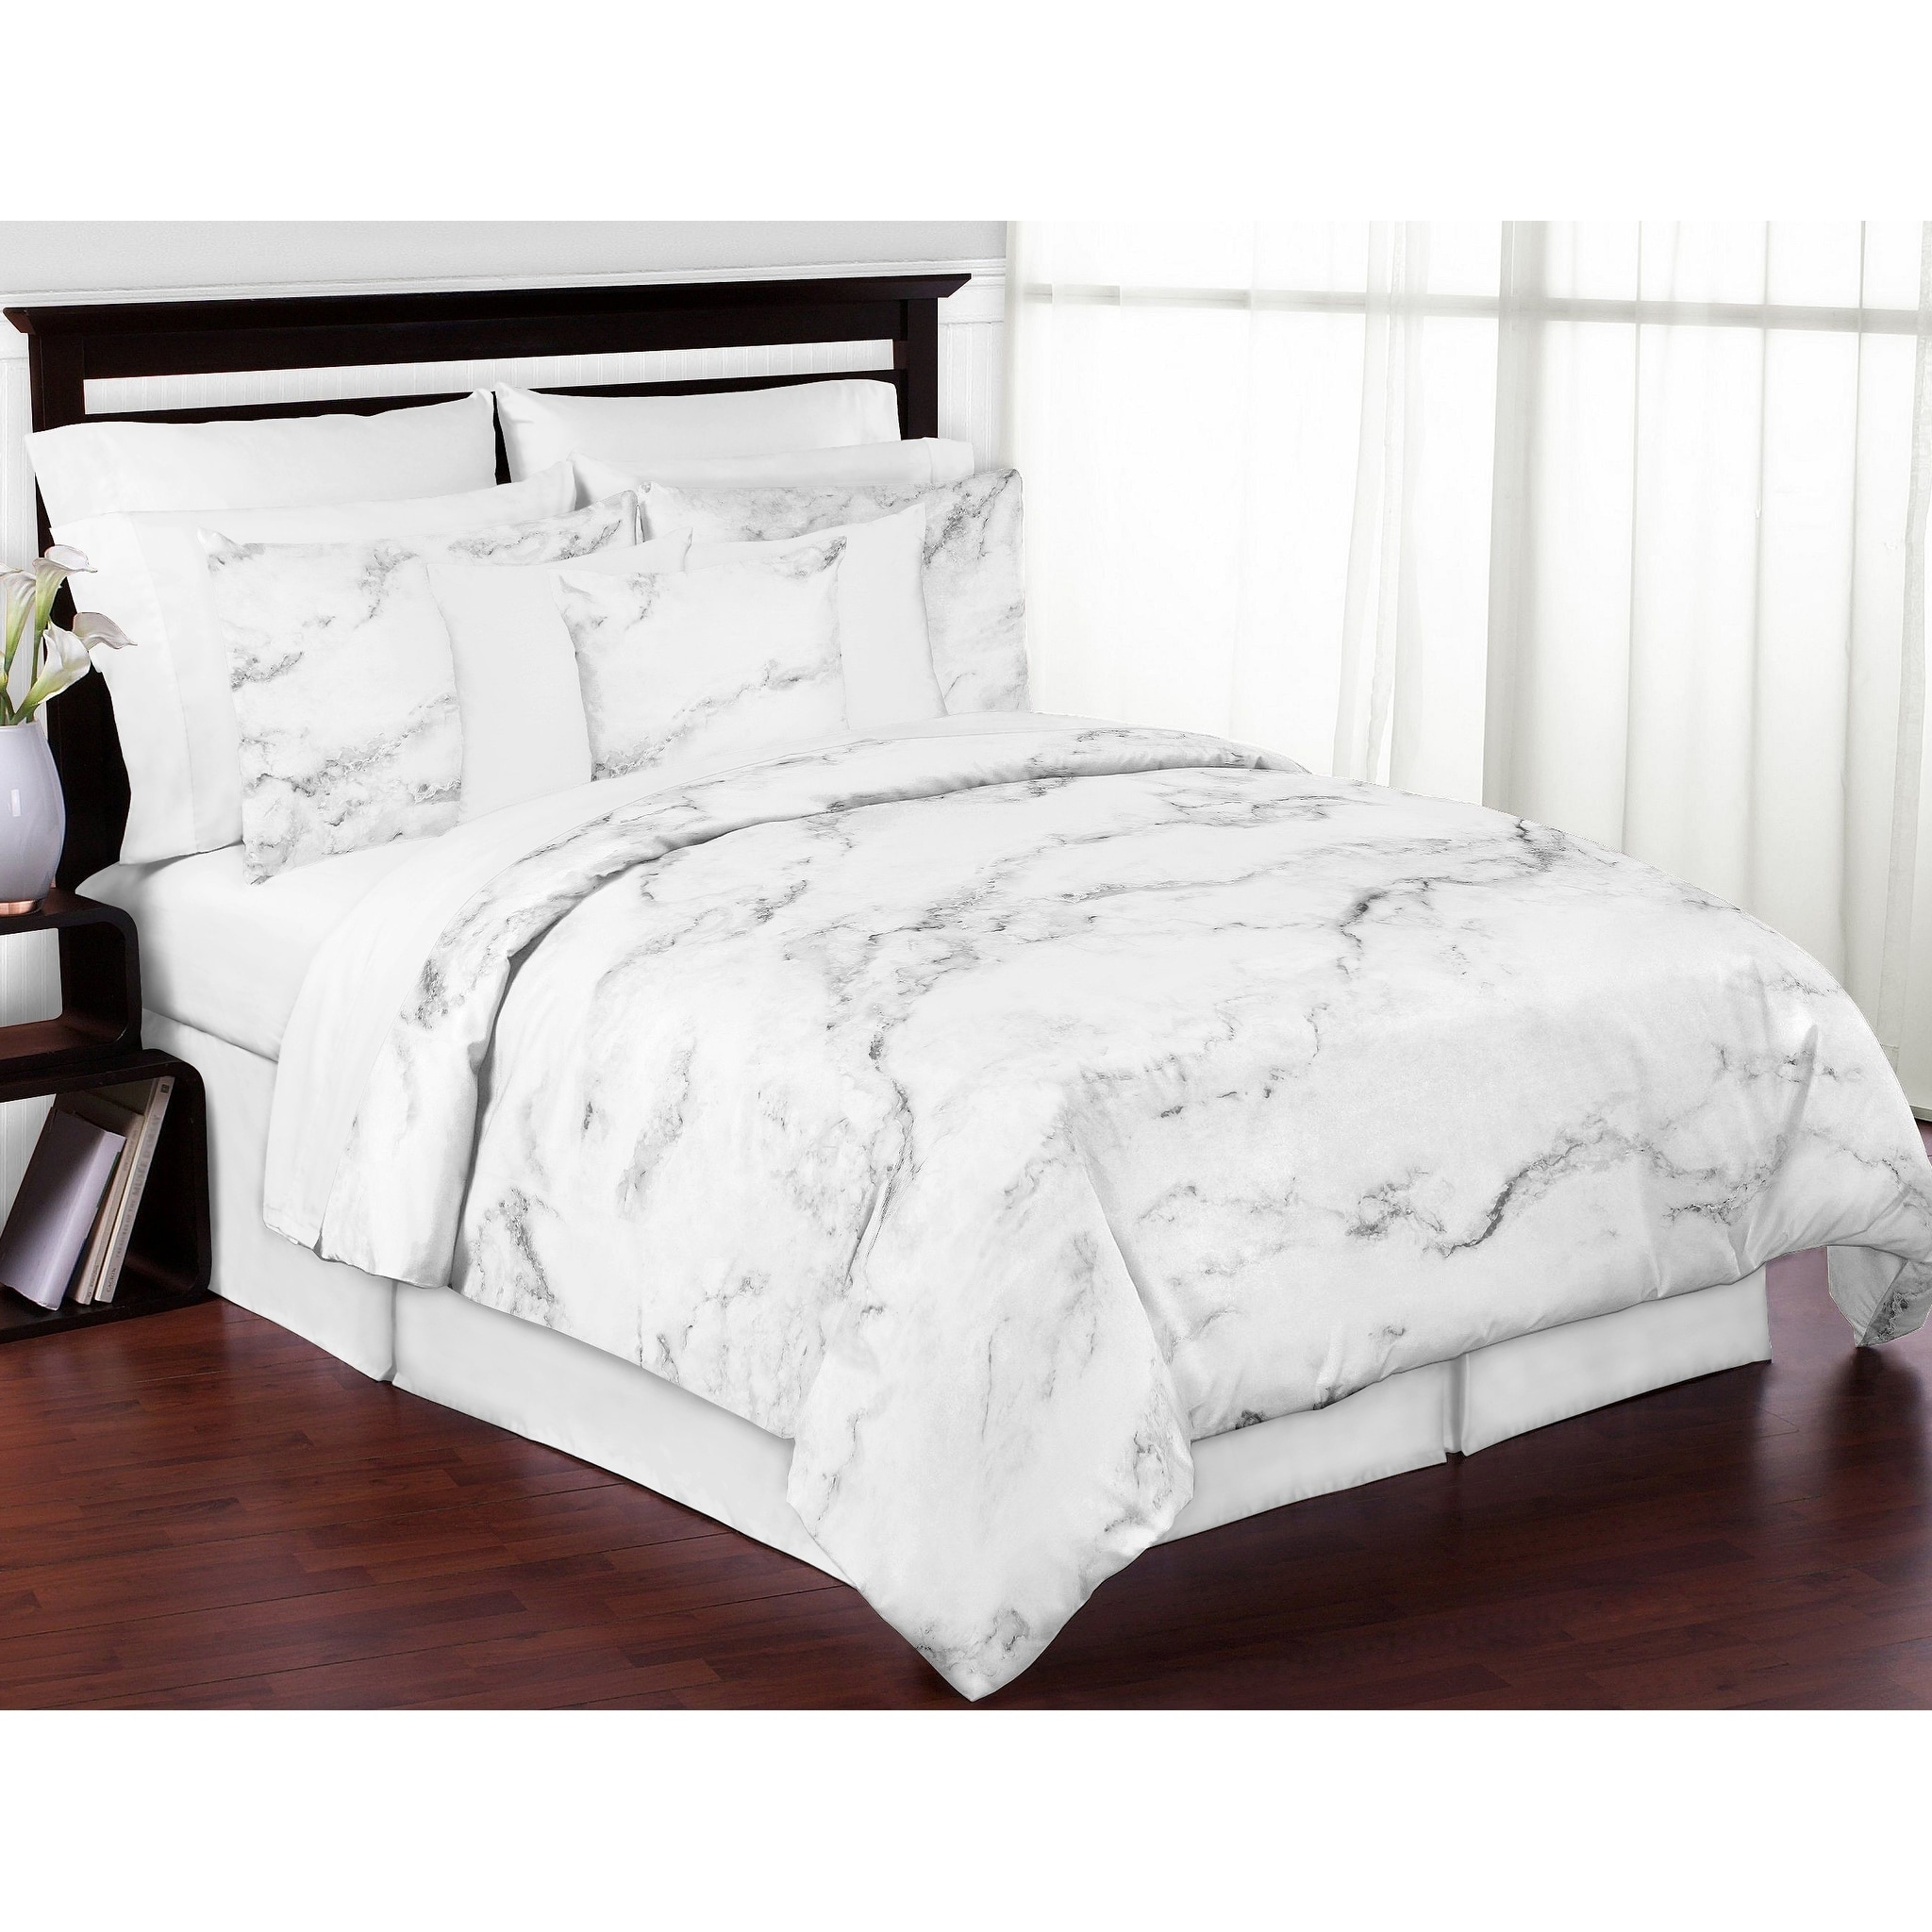 Sweet Jojo Designs Black And White Marble Collection 3 Piece Comforter Set Overstock 14680354